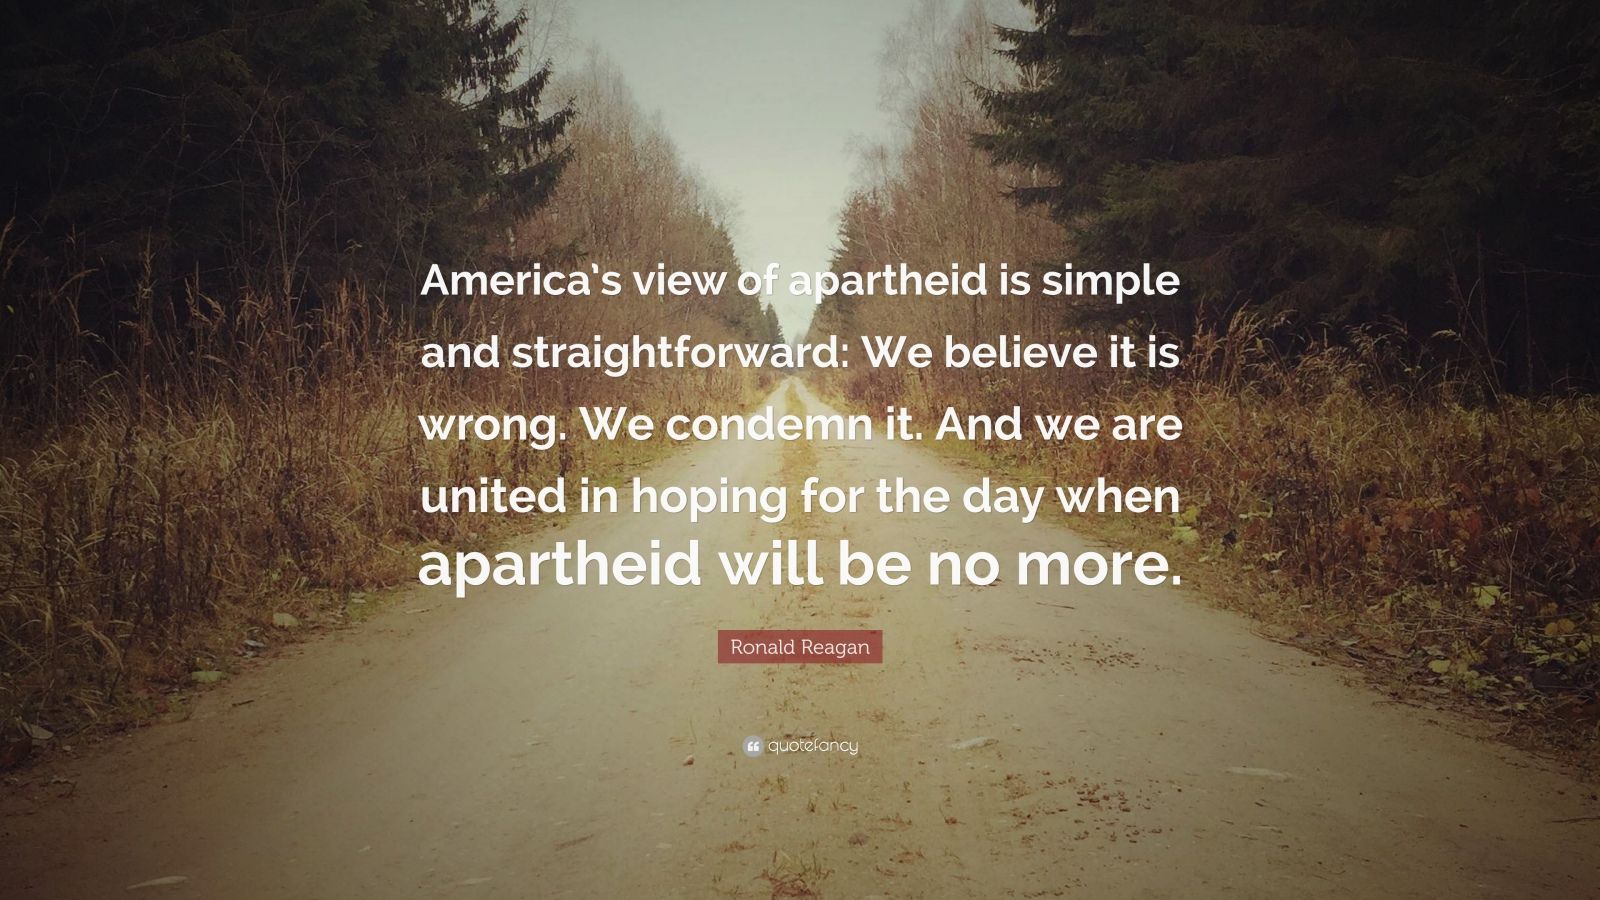 69841 Ronald Reagan Quote America s view of apartheid is simple and